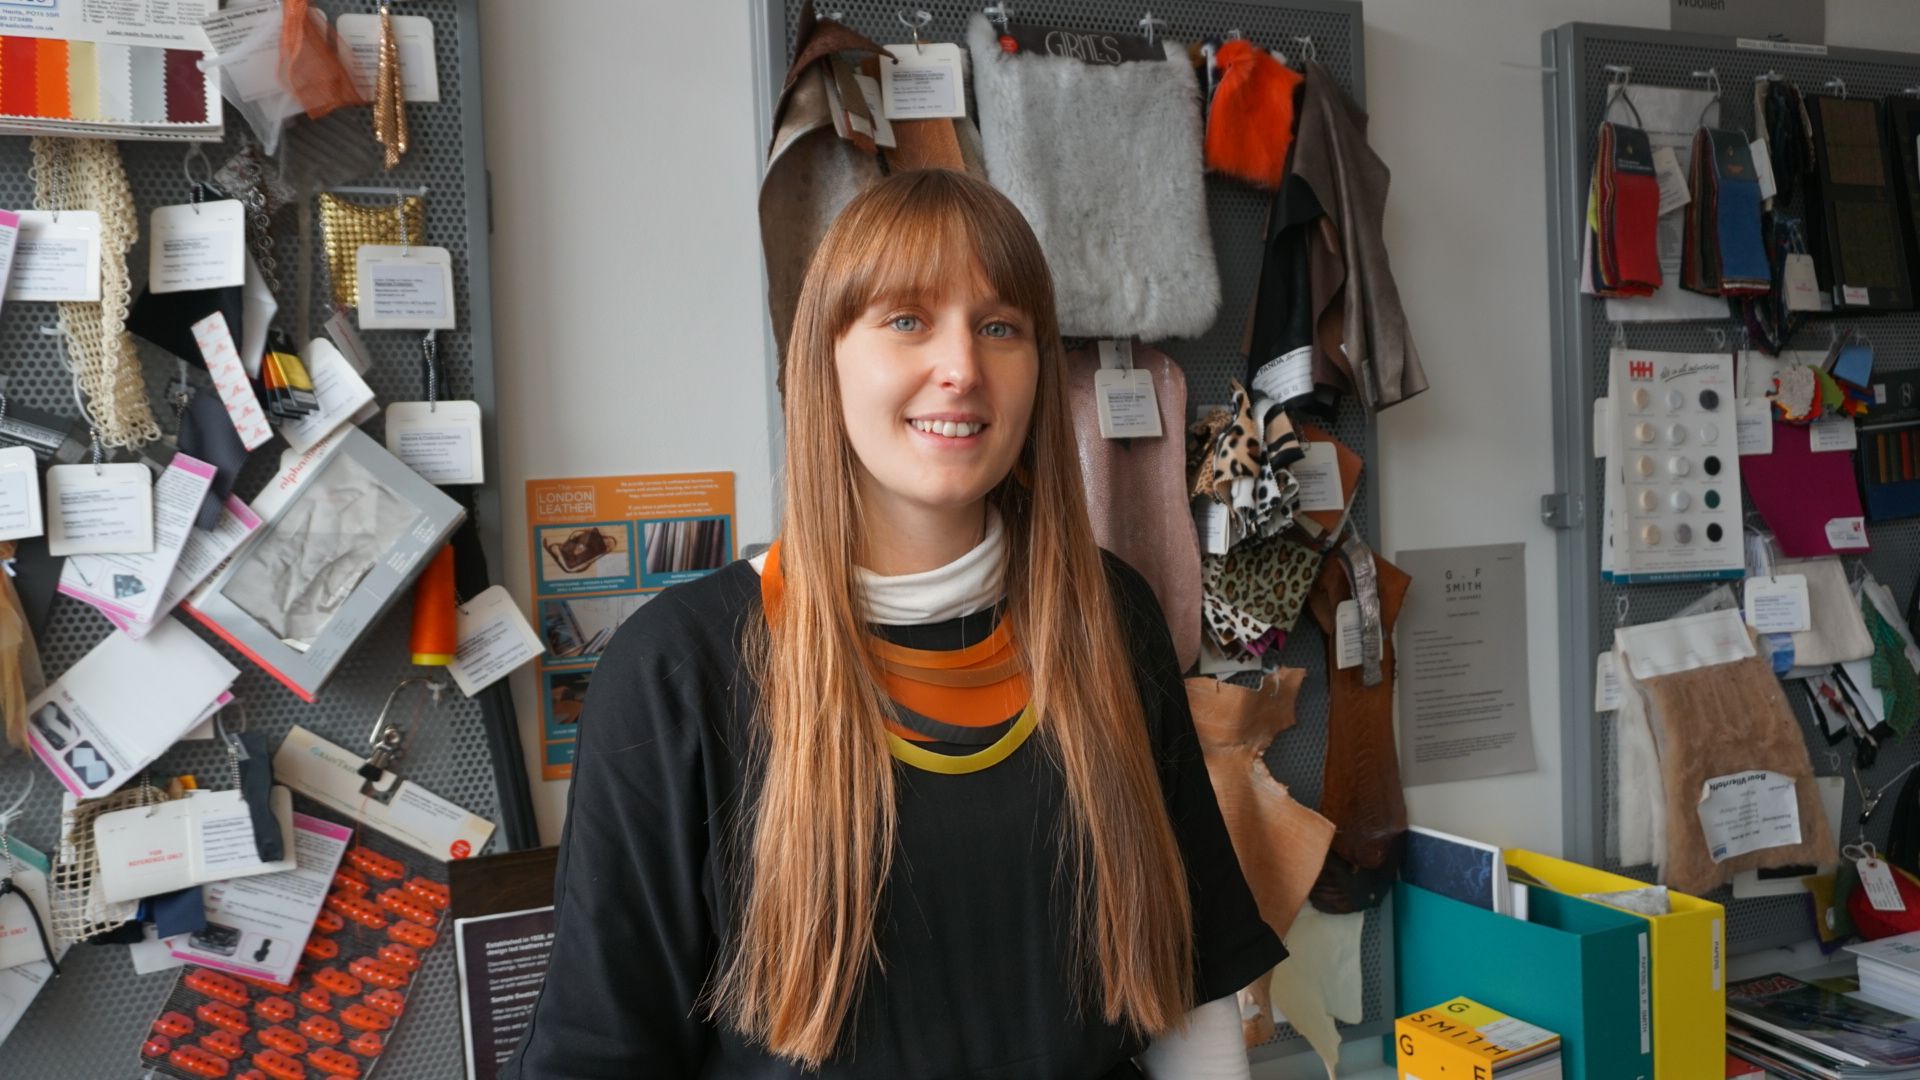 Billie Coxhead, Materials and Products Co-ordinator at LCF and Central Saint Martins (CSM) 